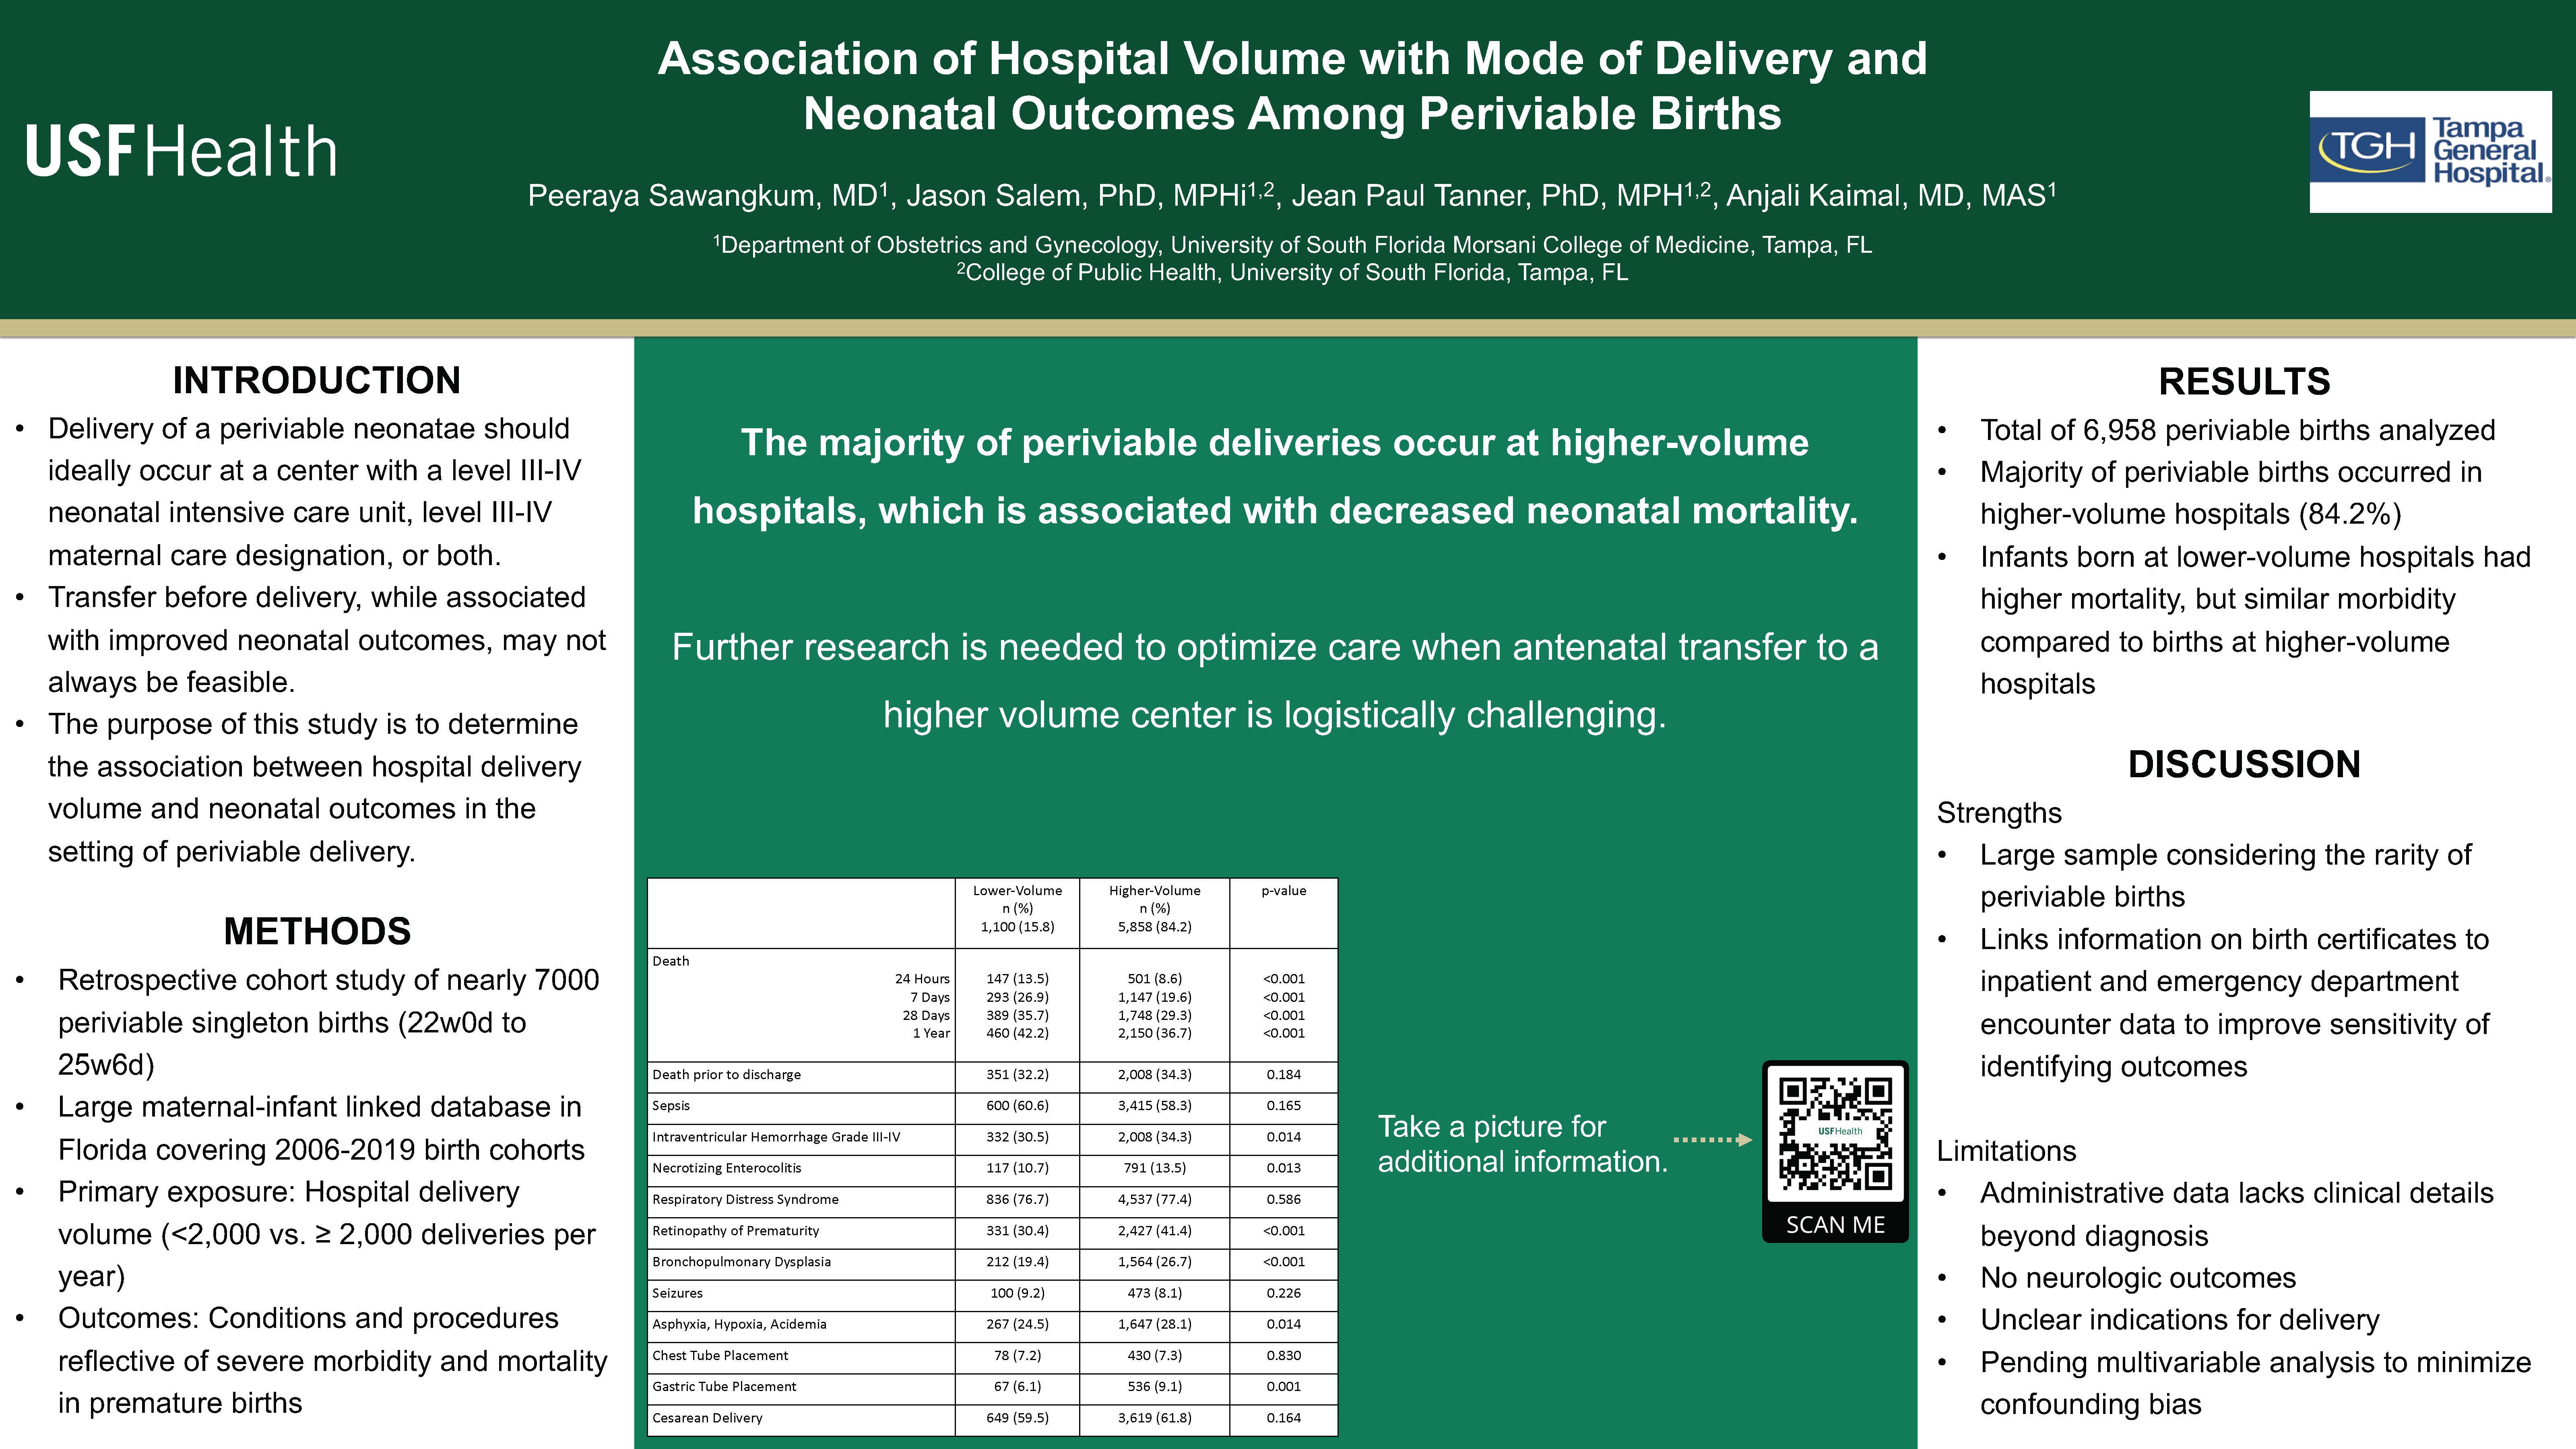 Association of Hospital Volume with Mode of Delivery and Neonatal Outcomes Among Periviable Births